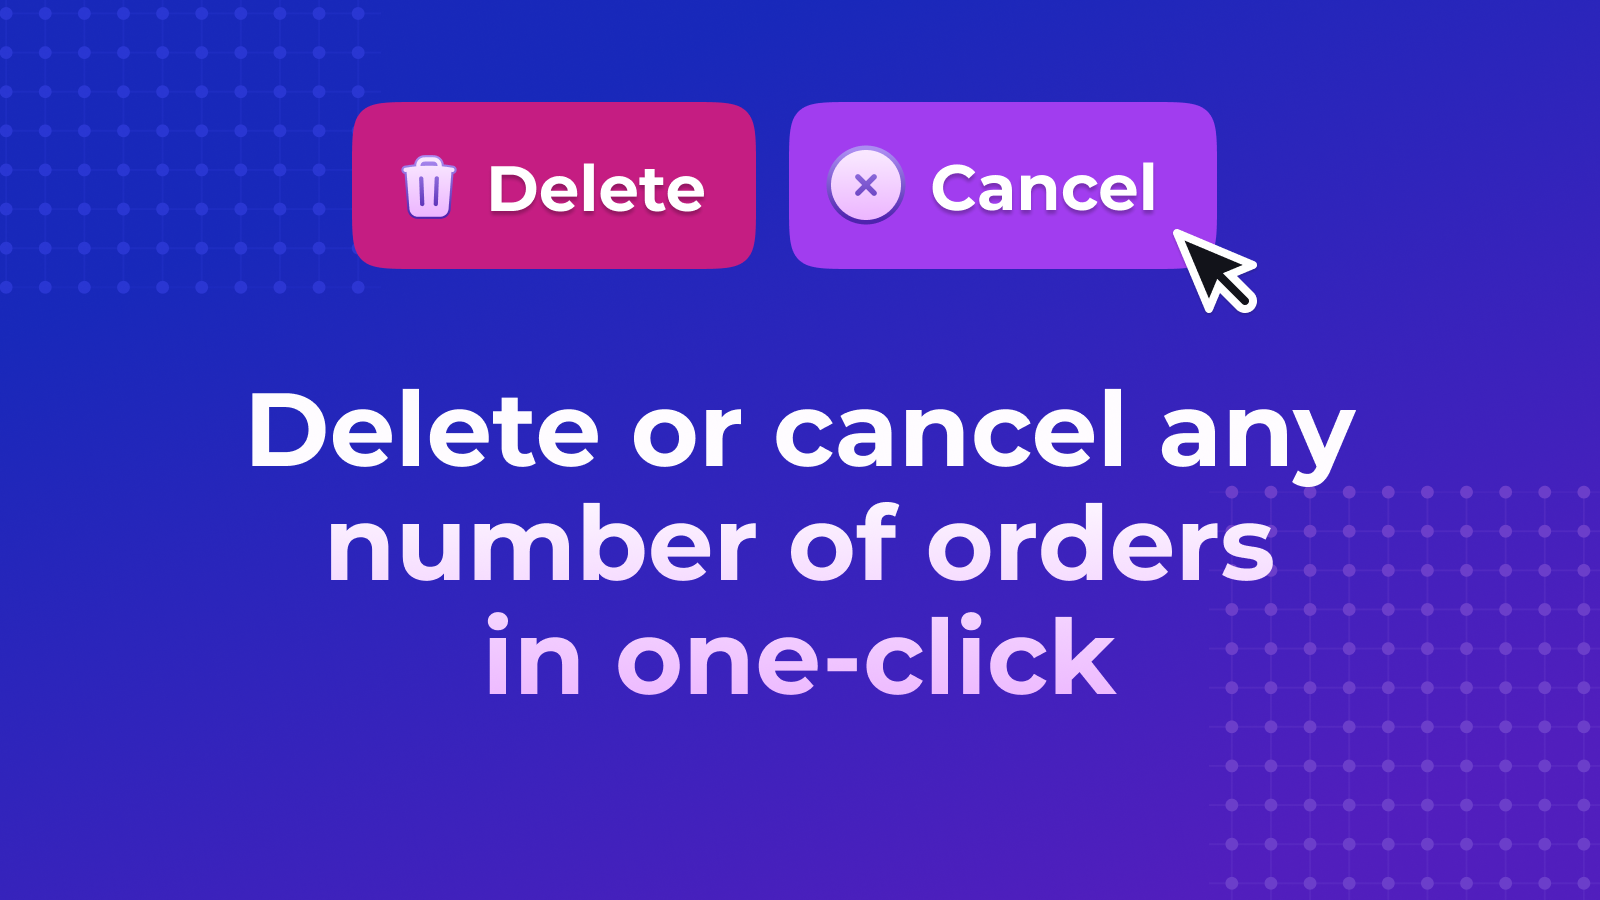 Cancel and delete orders in bulk using search and filters